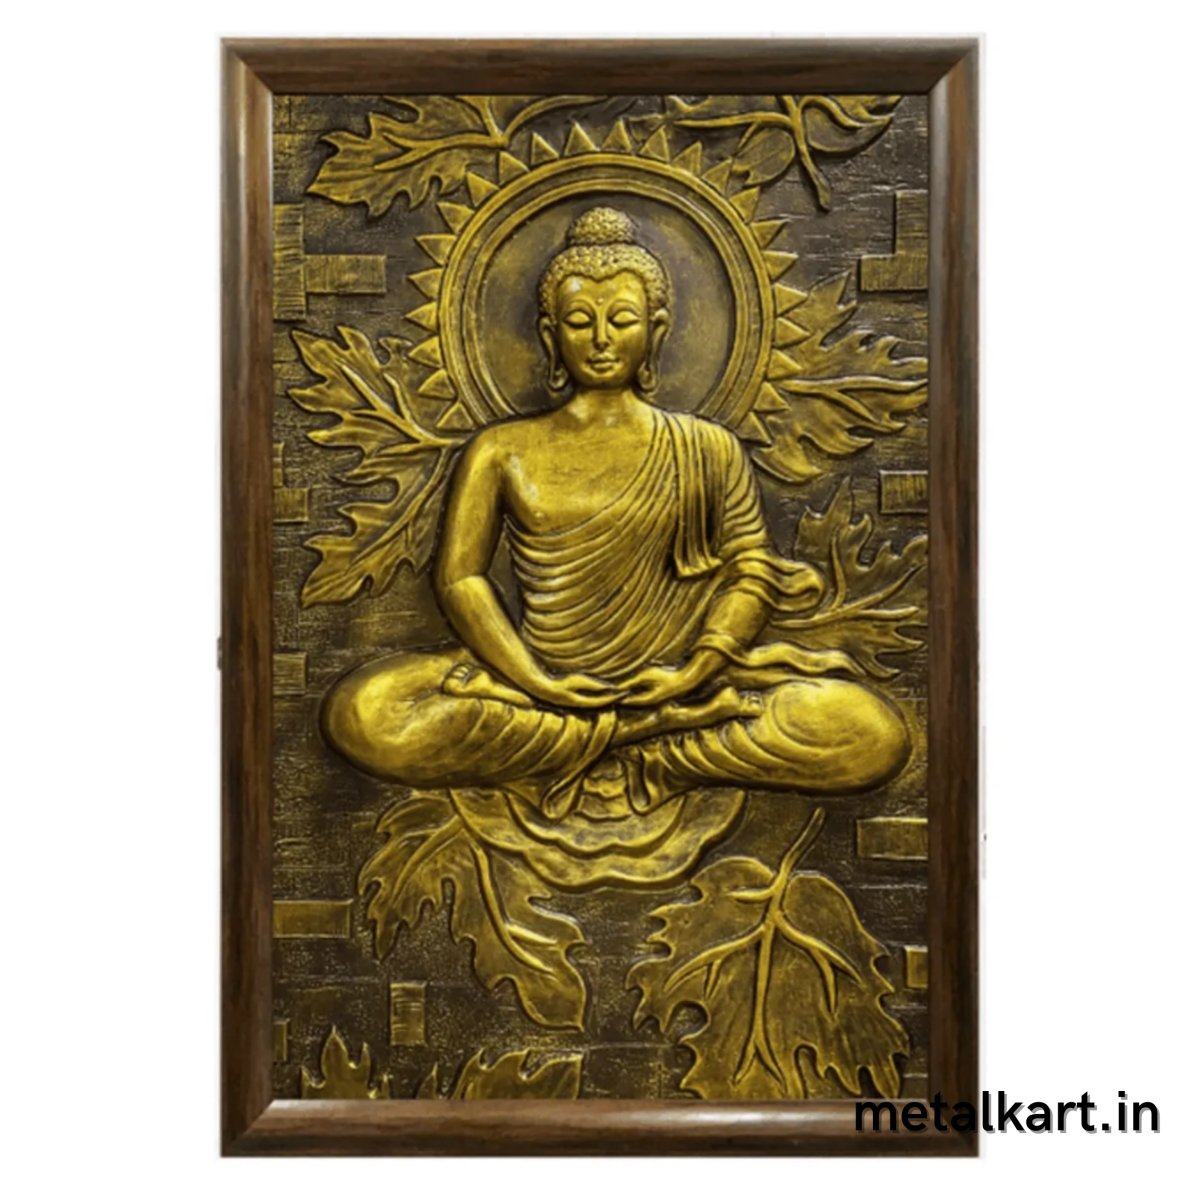 Metalkart Special Wall Mounted 3D Buddha Sculpture (36 x 24 Inches)